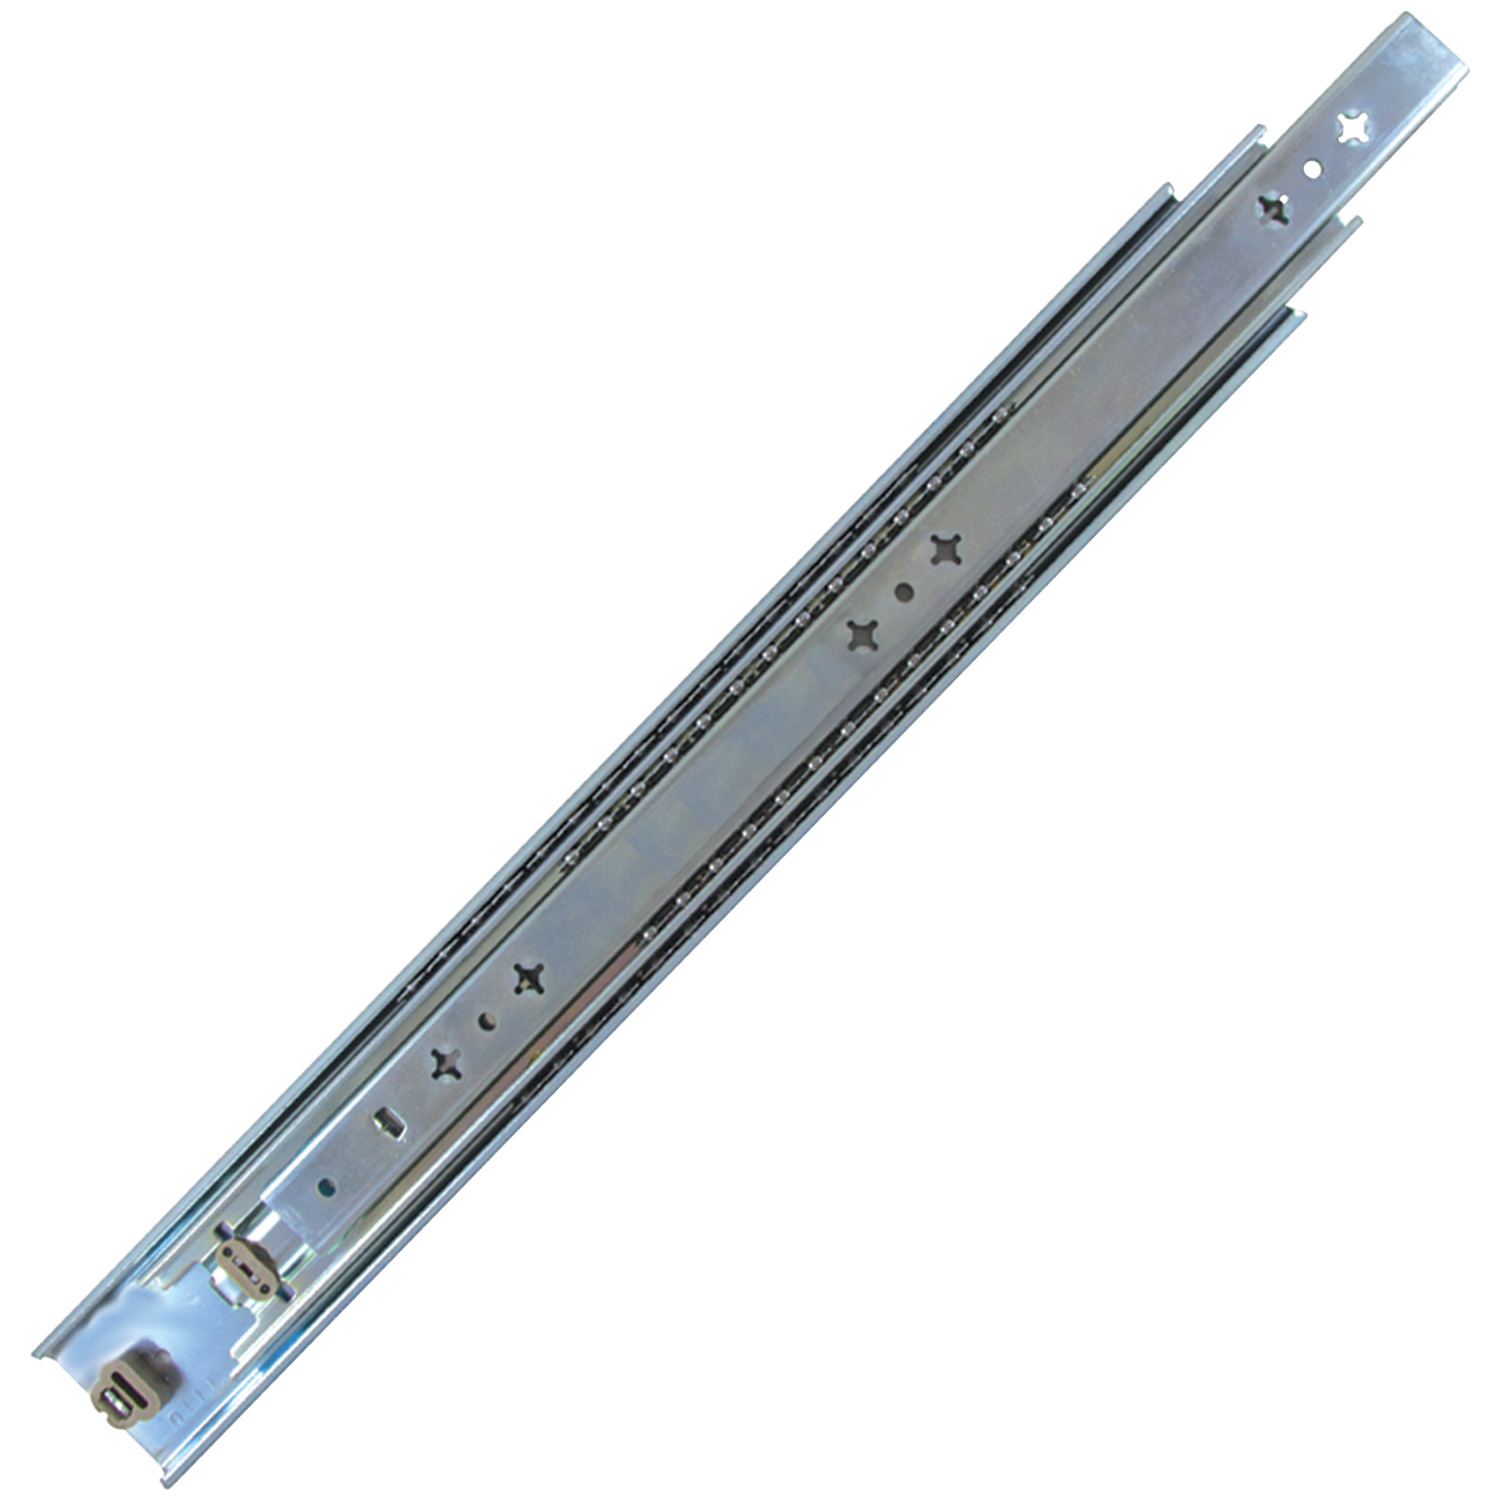 Drawer Slide - Full Extension 3 beam full extension drawer slide, supprts up to 80kg. Hold-in detent when slide is closed prevents drawer from sliding open. Tested to 80,000 cycles.